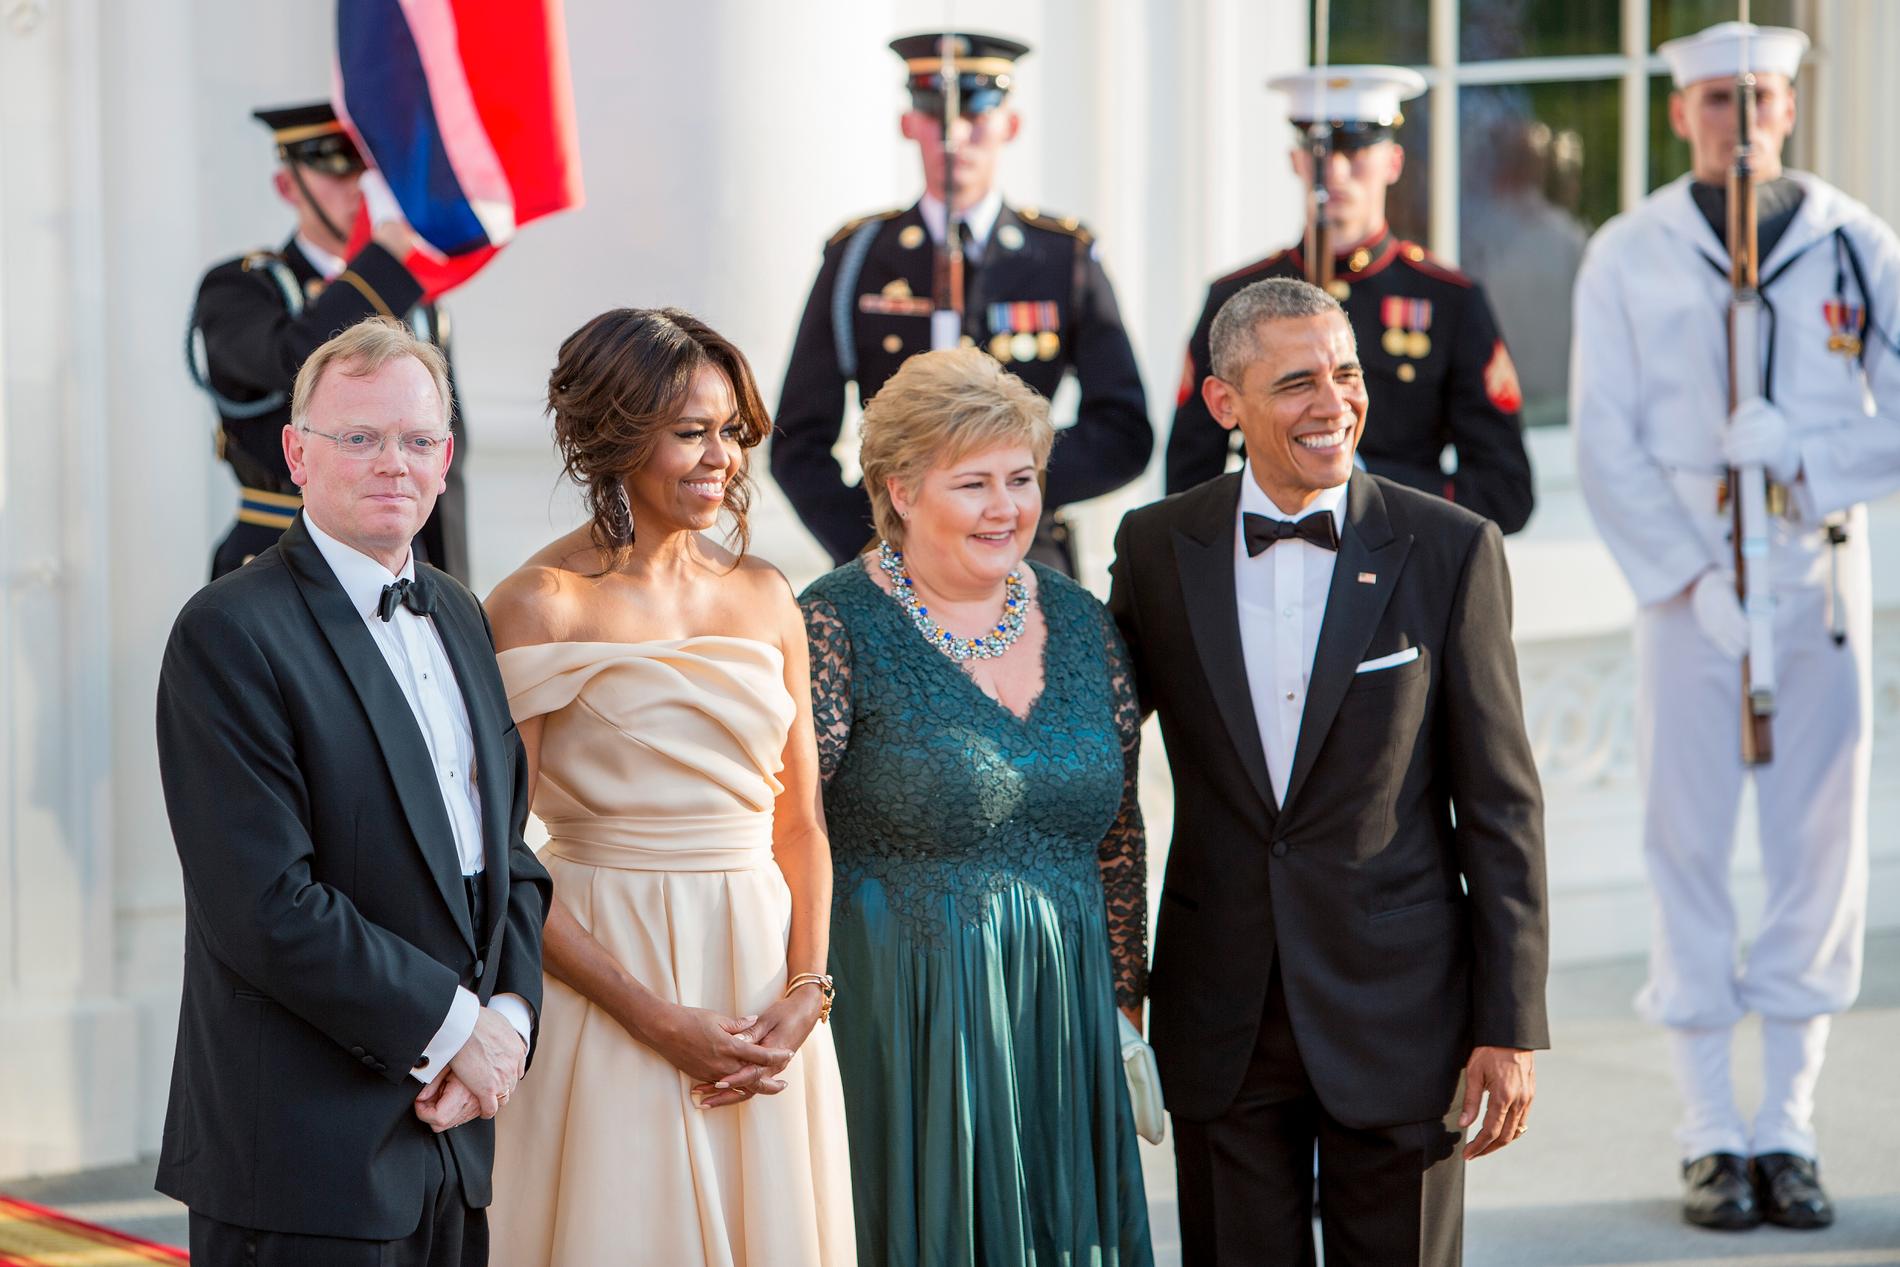 A LONG COLLABORATION: Finnes and Solberg have worked together to get Solberg elected as prime minister.  In 2016, they visited the White House and the Obama couple. 